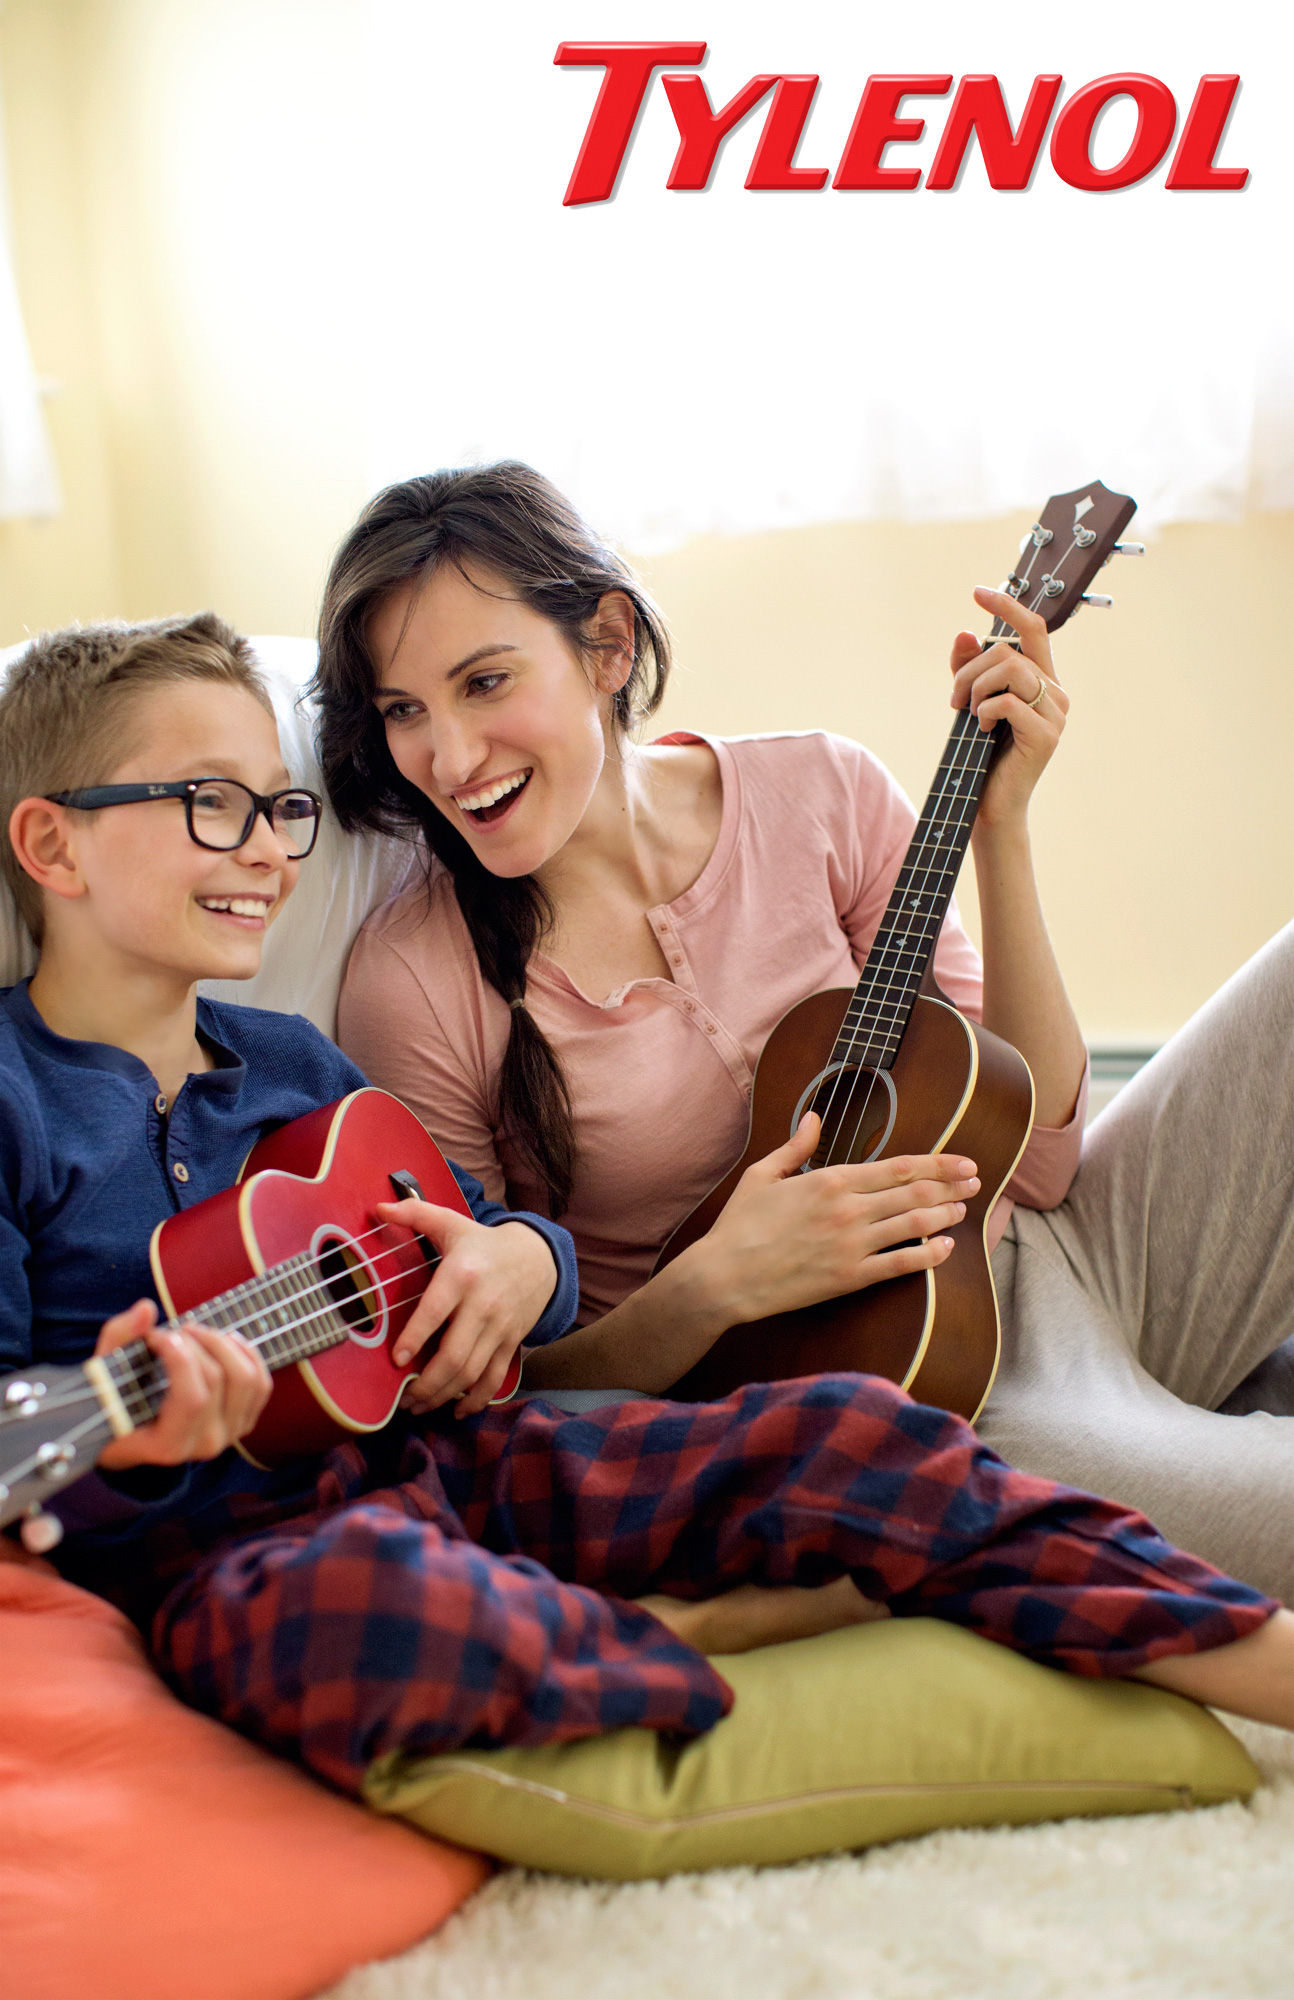 A woman plays ukulele with her son in a Tylenol Ad Campaign photographed by Lifestyle Photographer Diana Mulvihill